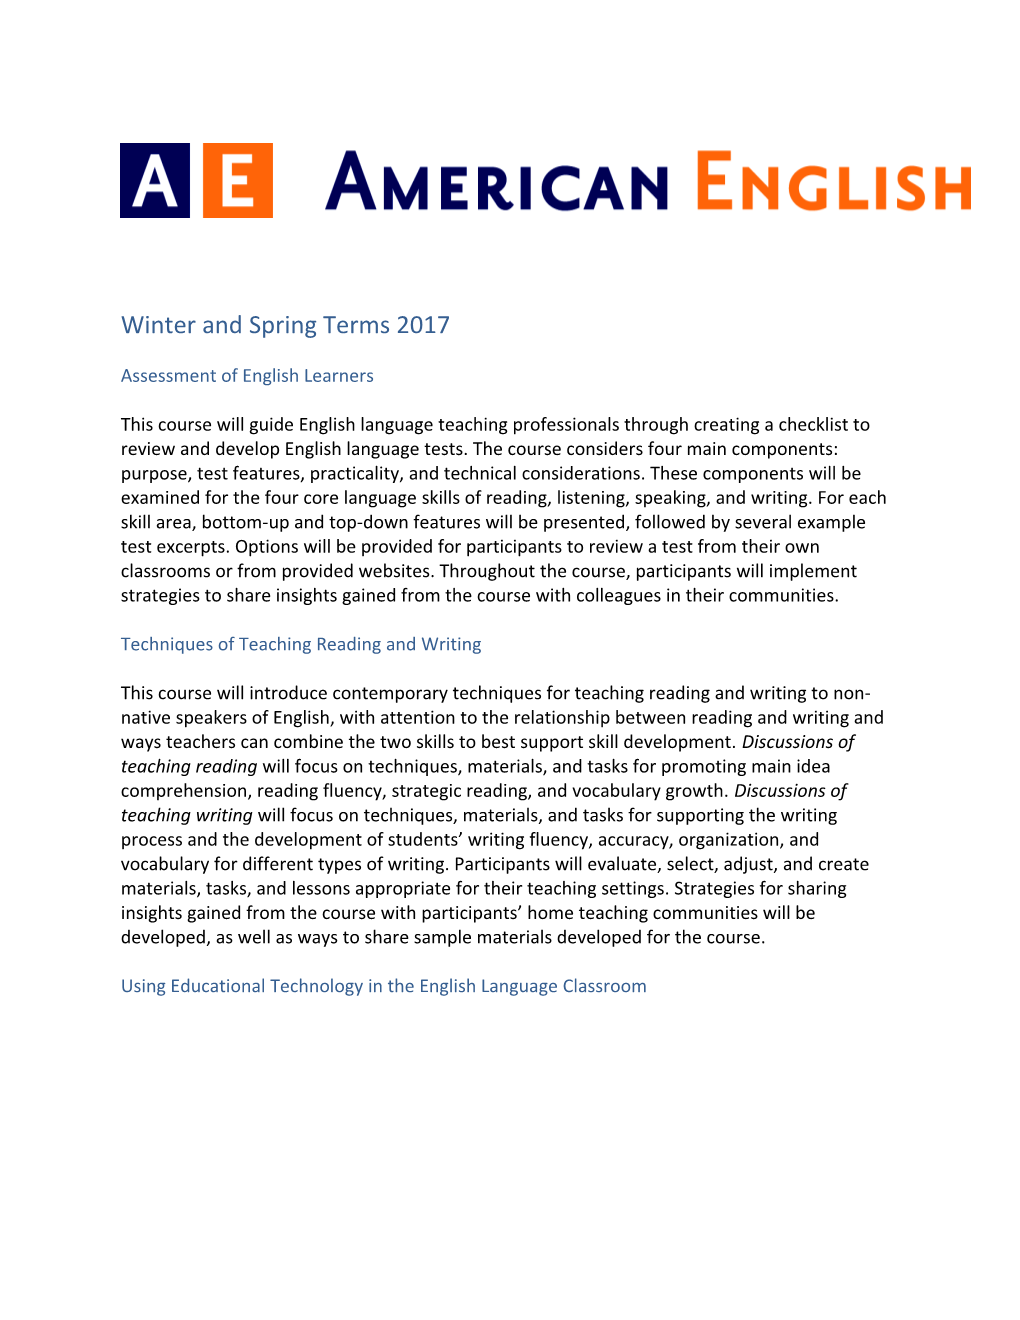 Winter and Spring Terms 2017